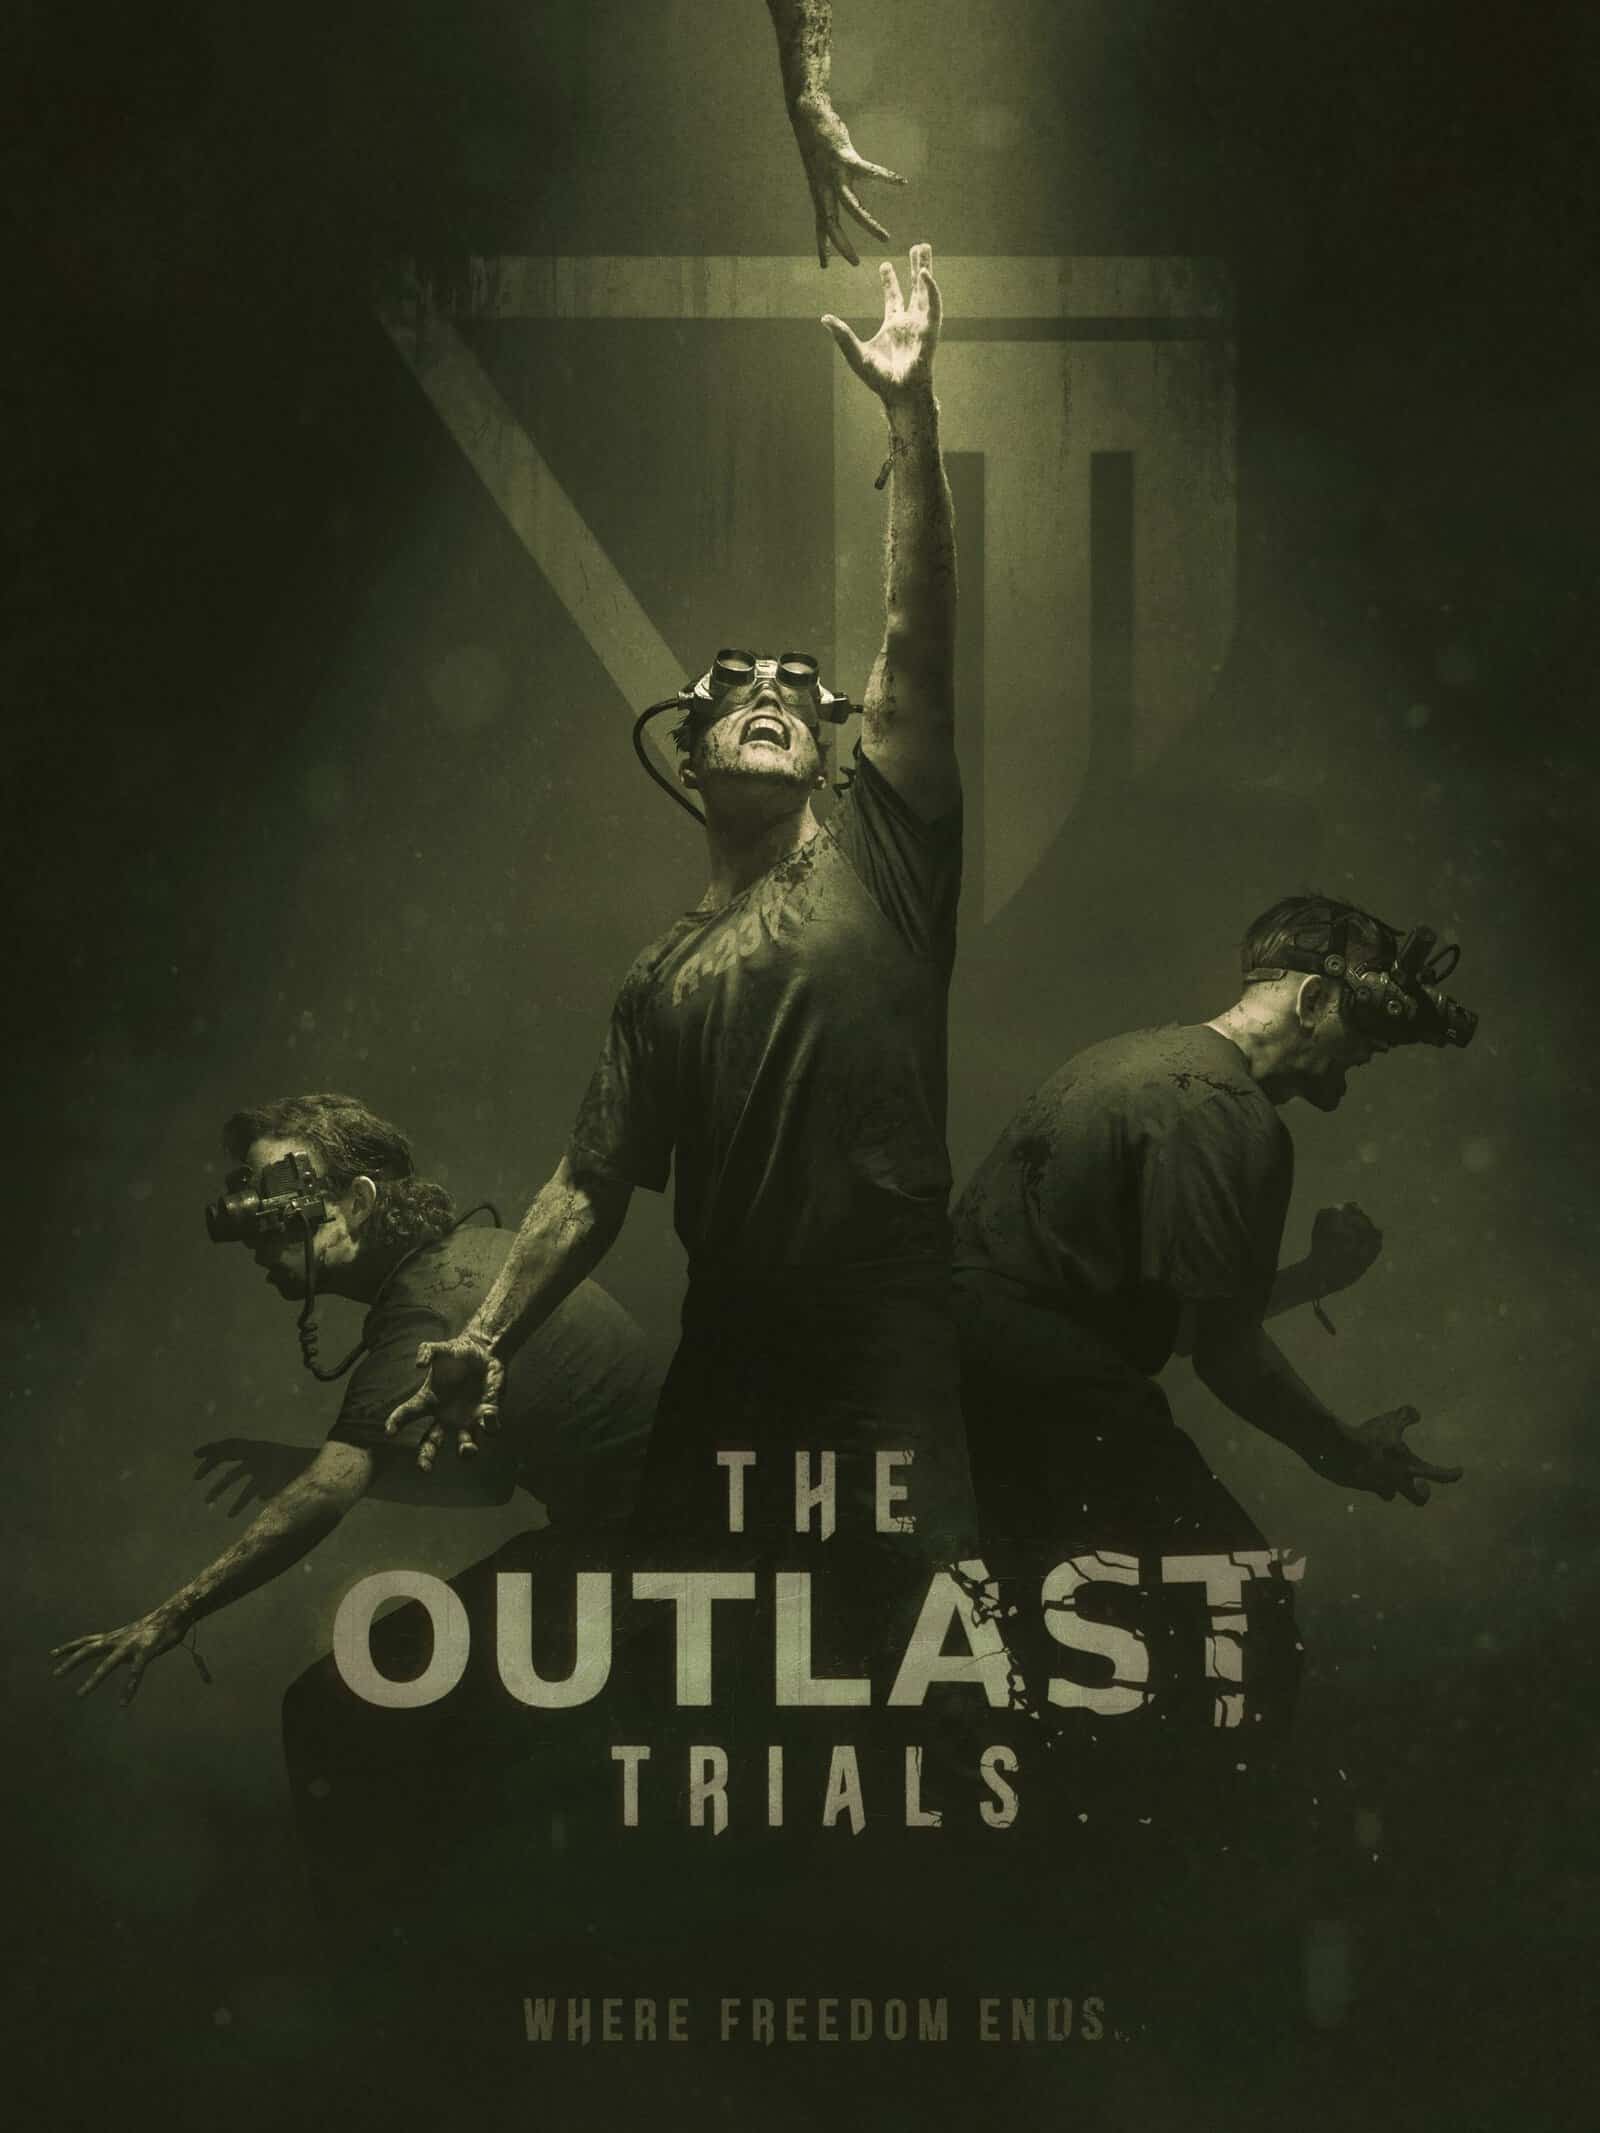 Is Outlast trials cross play between PS5 and PC? - Quora